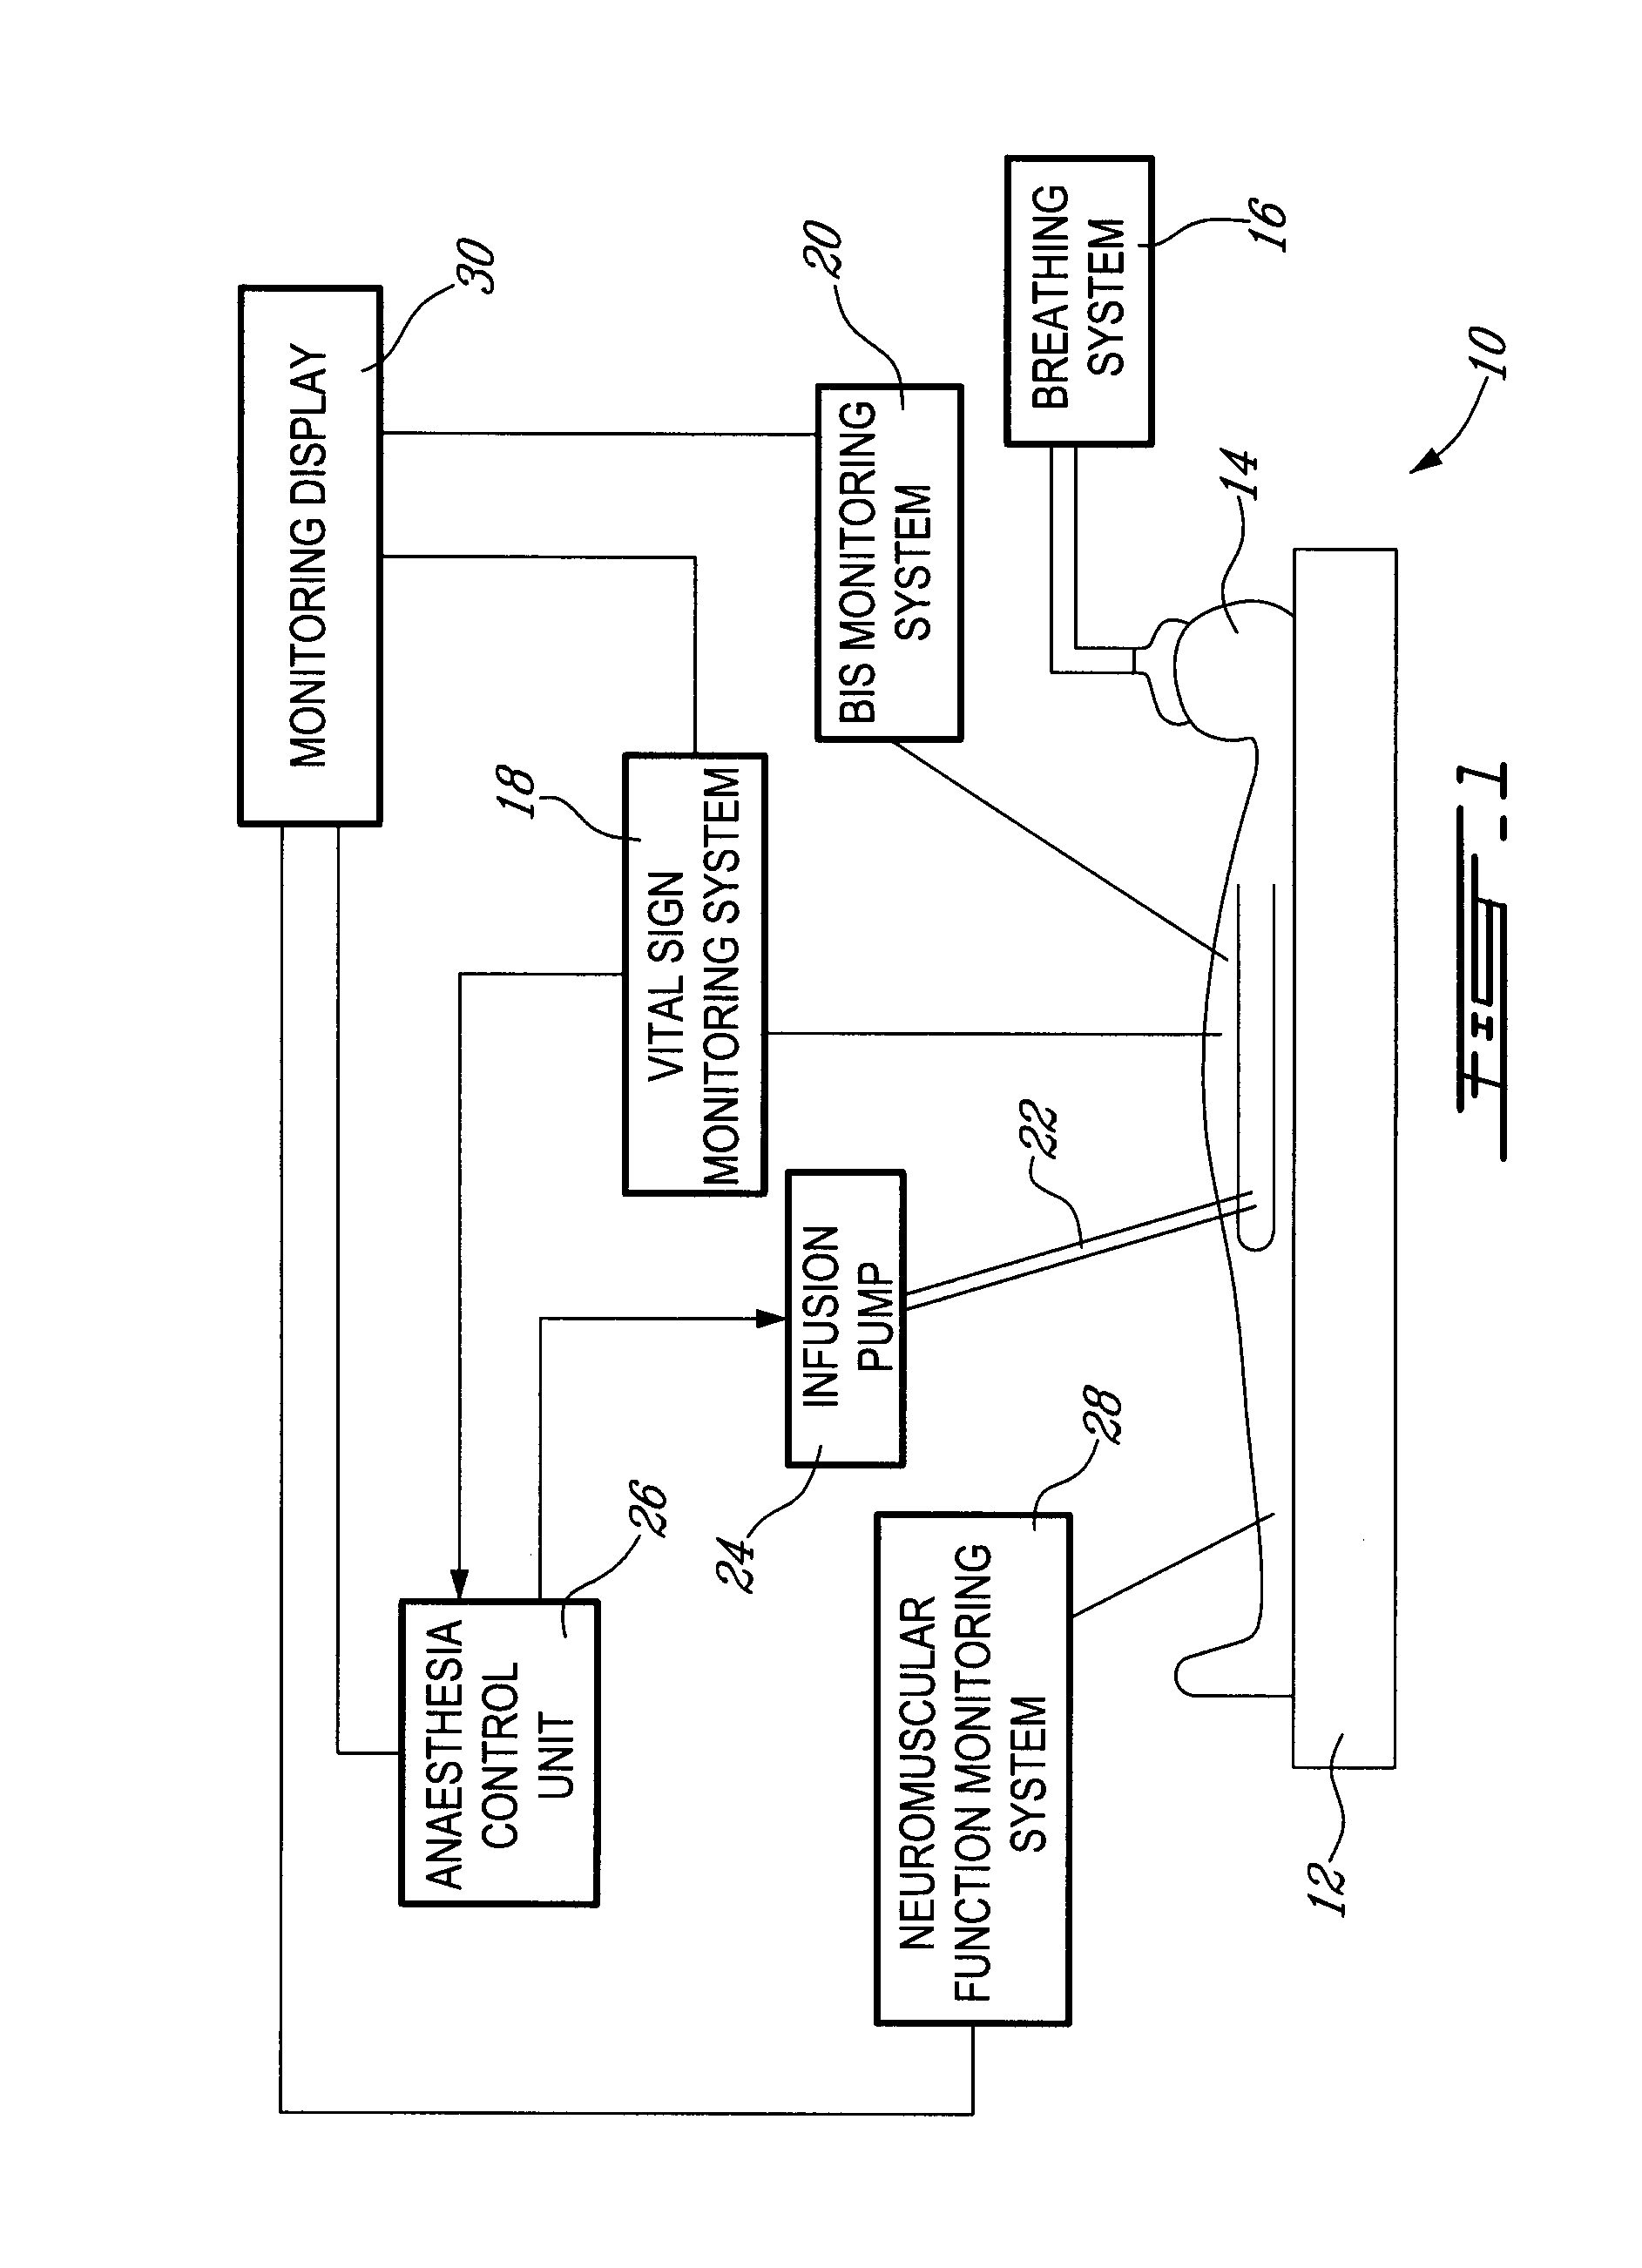 Method and system for administering an anaesthetic